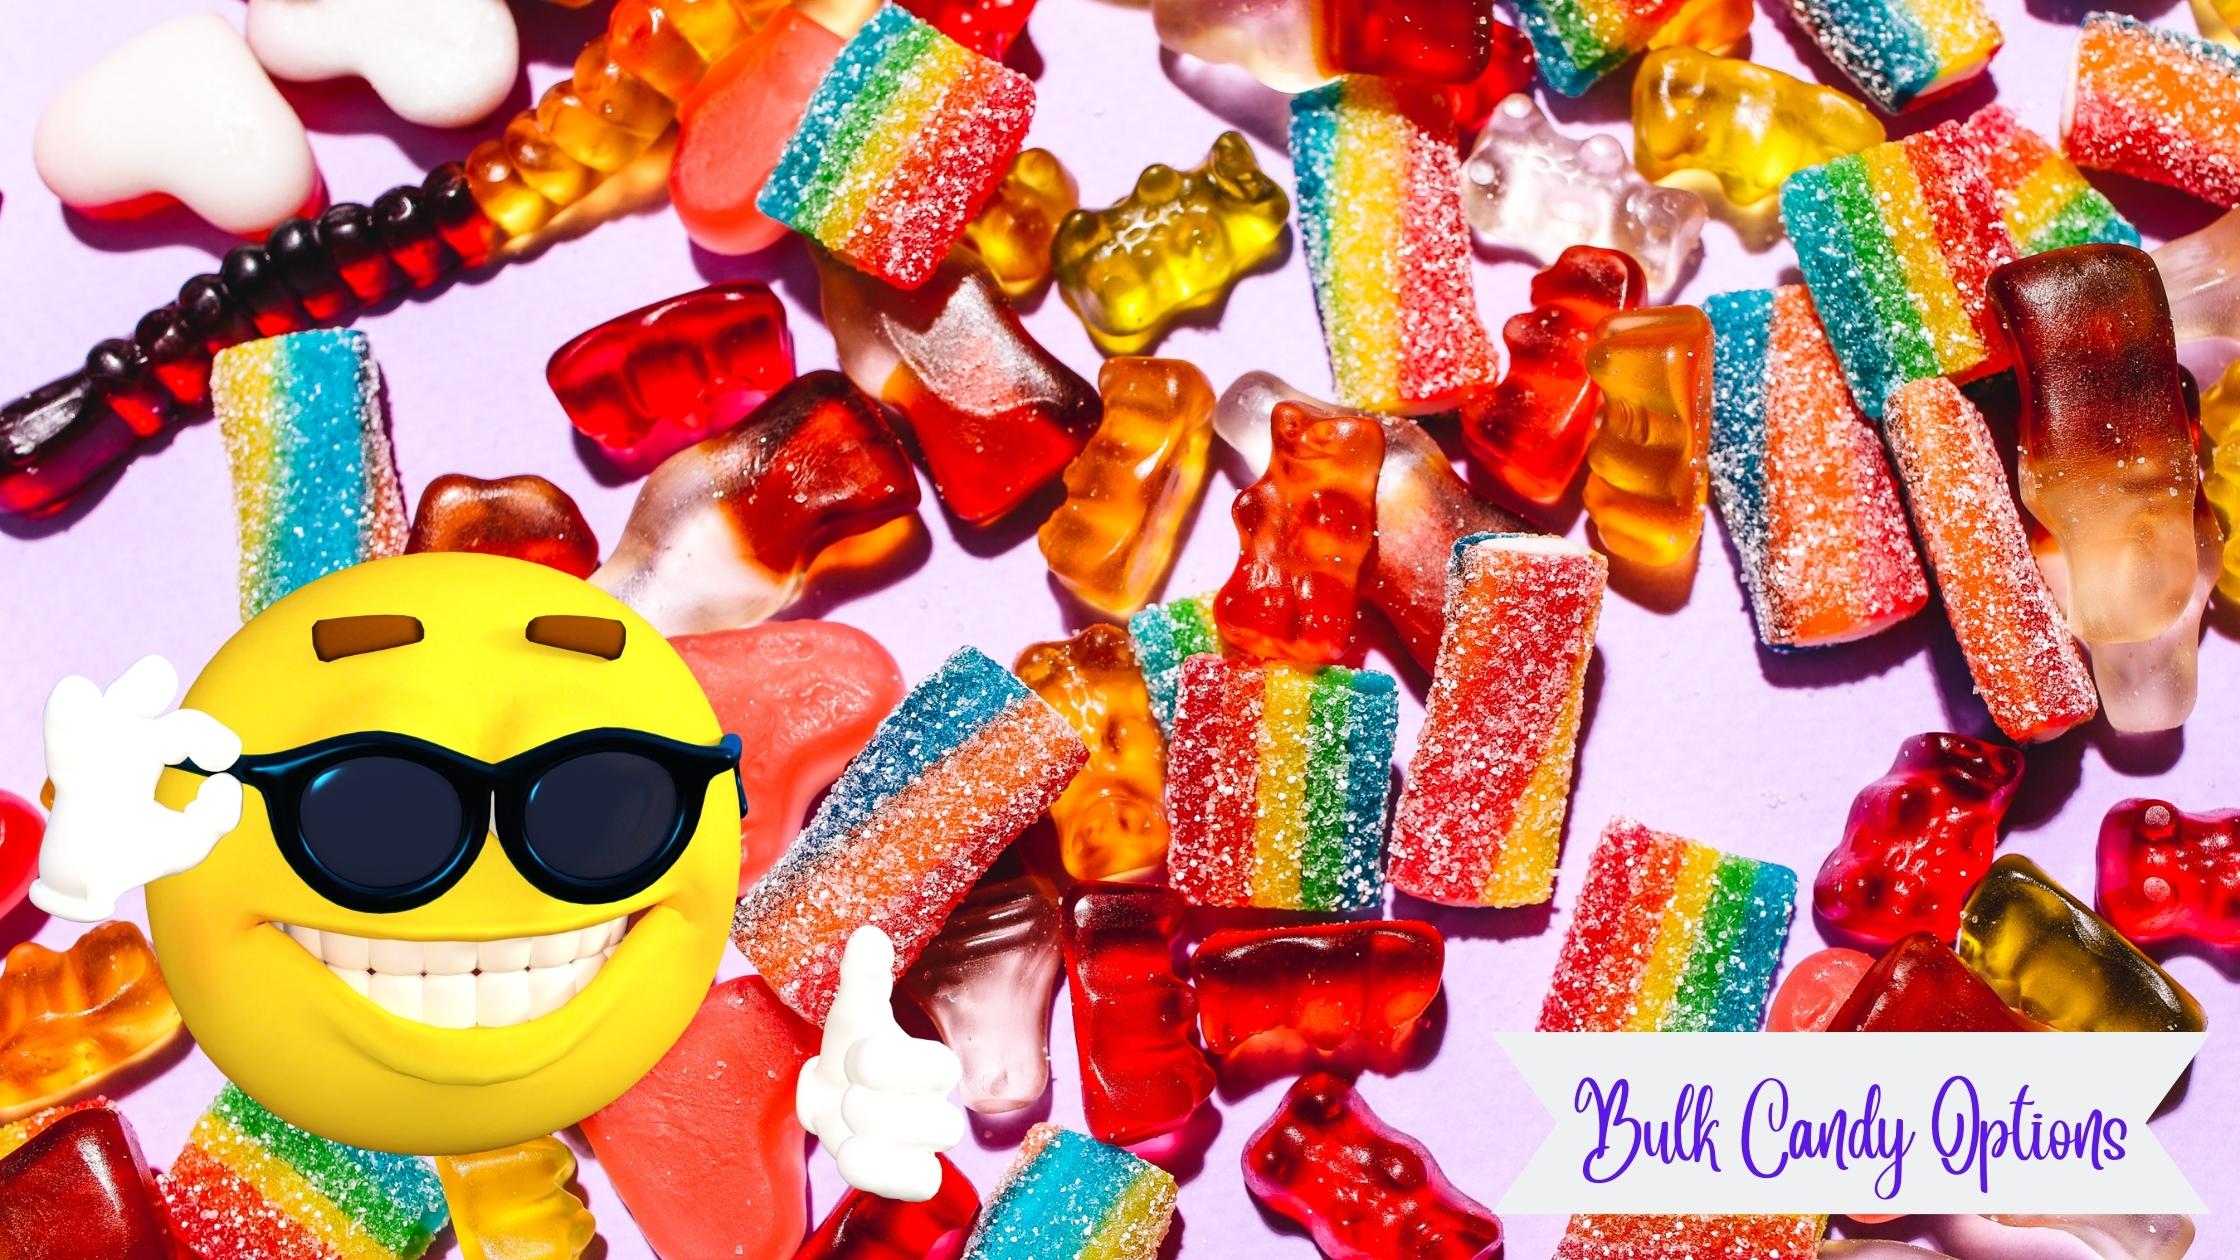 The Top 15 Most Amazing Bulk Candy Ideas Online